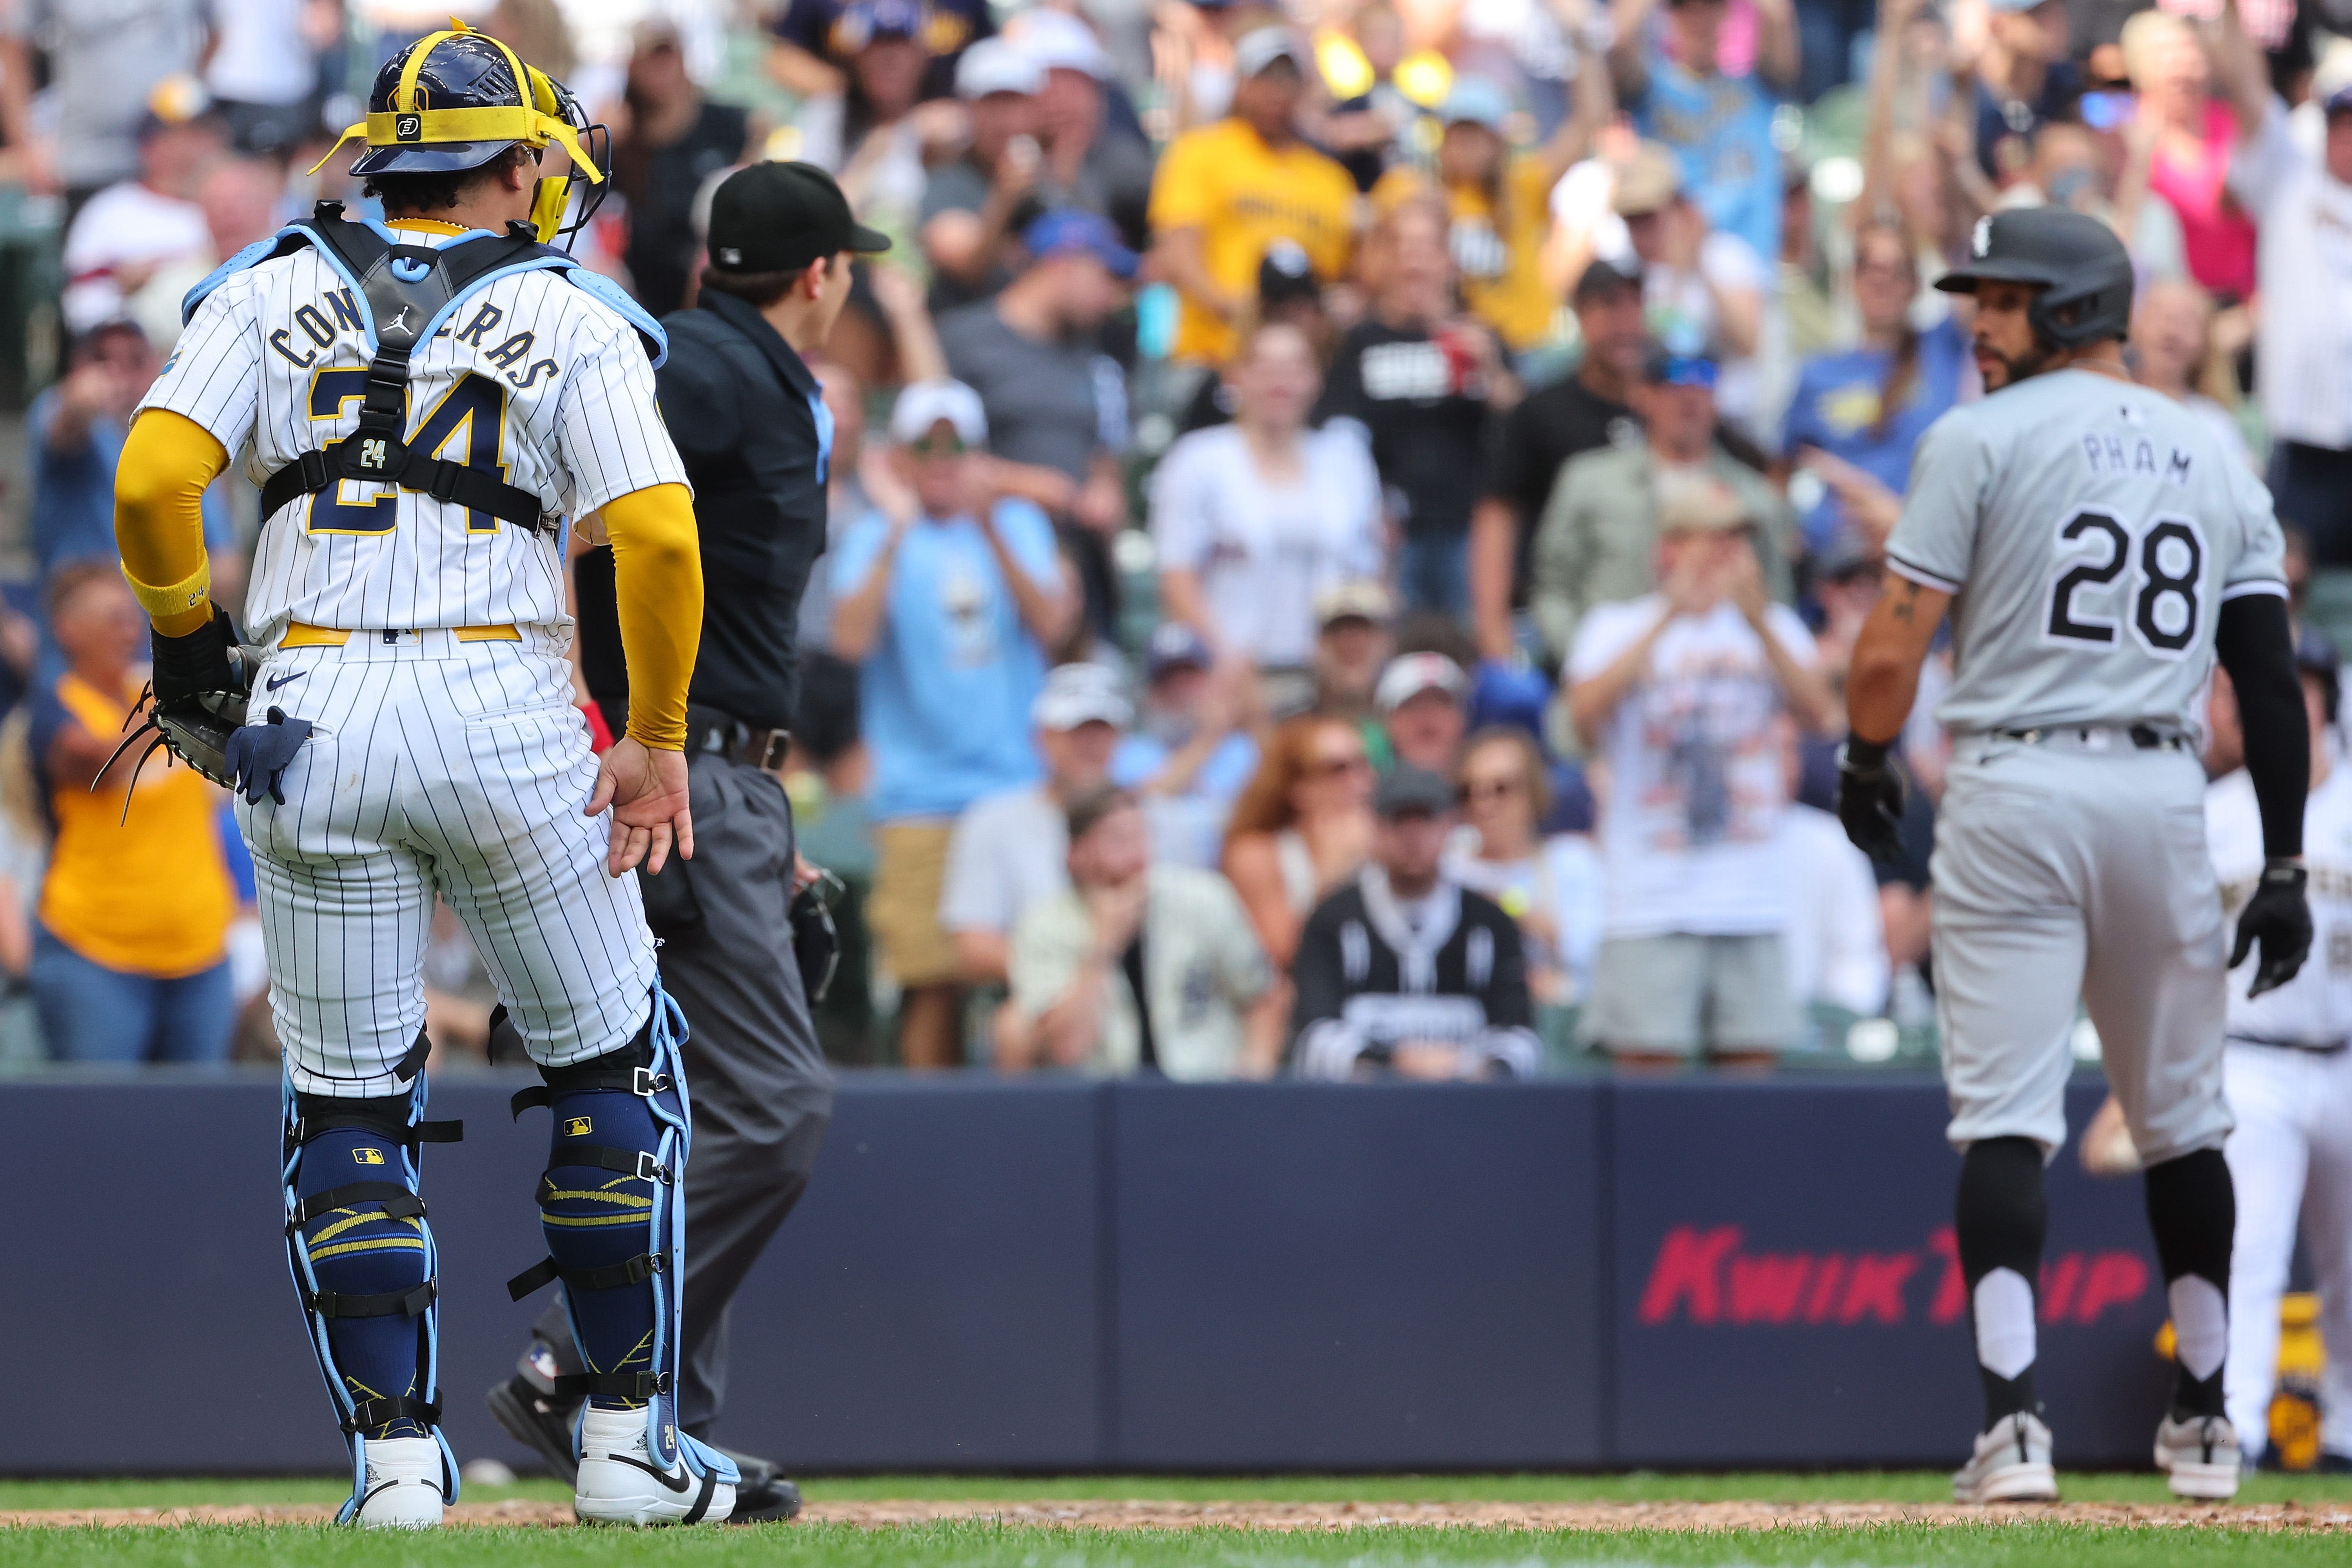 Play at plate leaves White Sox's Tommy Pham infuriated with Brewers